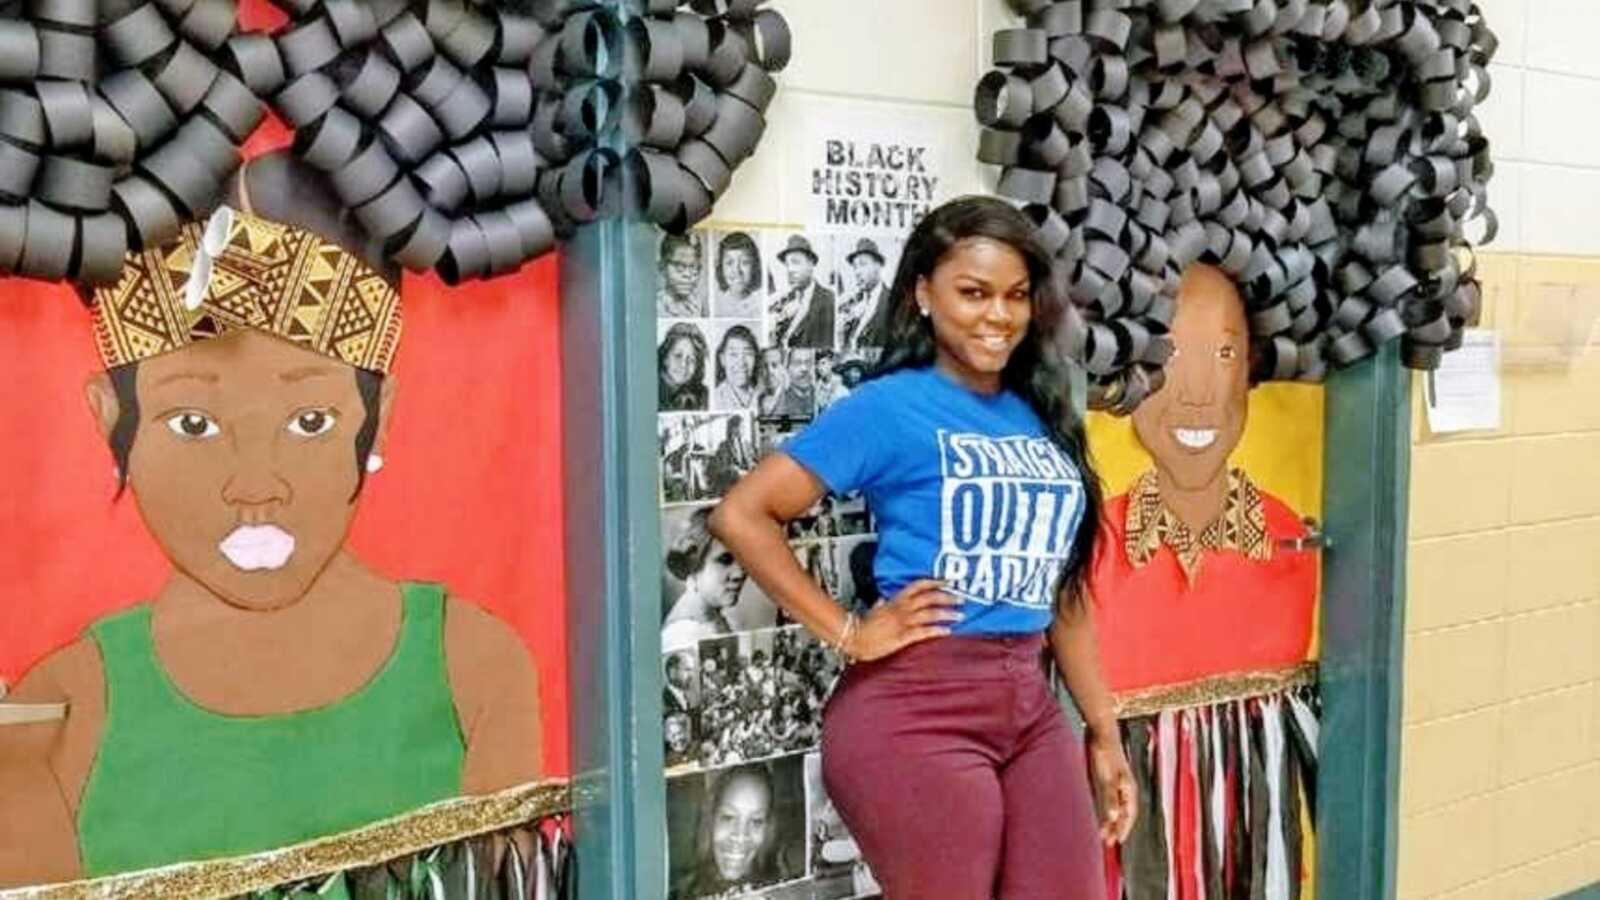 Teacher proudly stands next to her Black History Month artwork